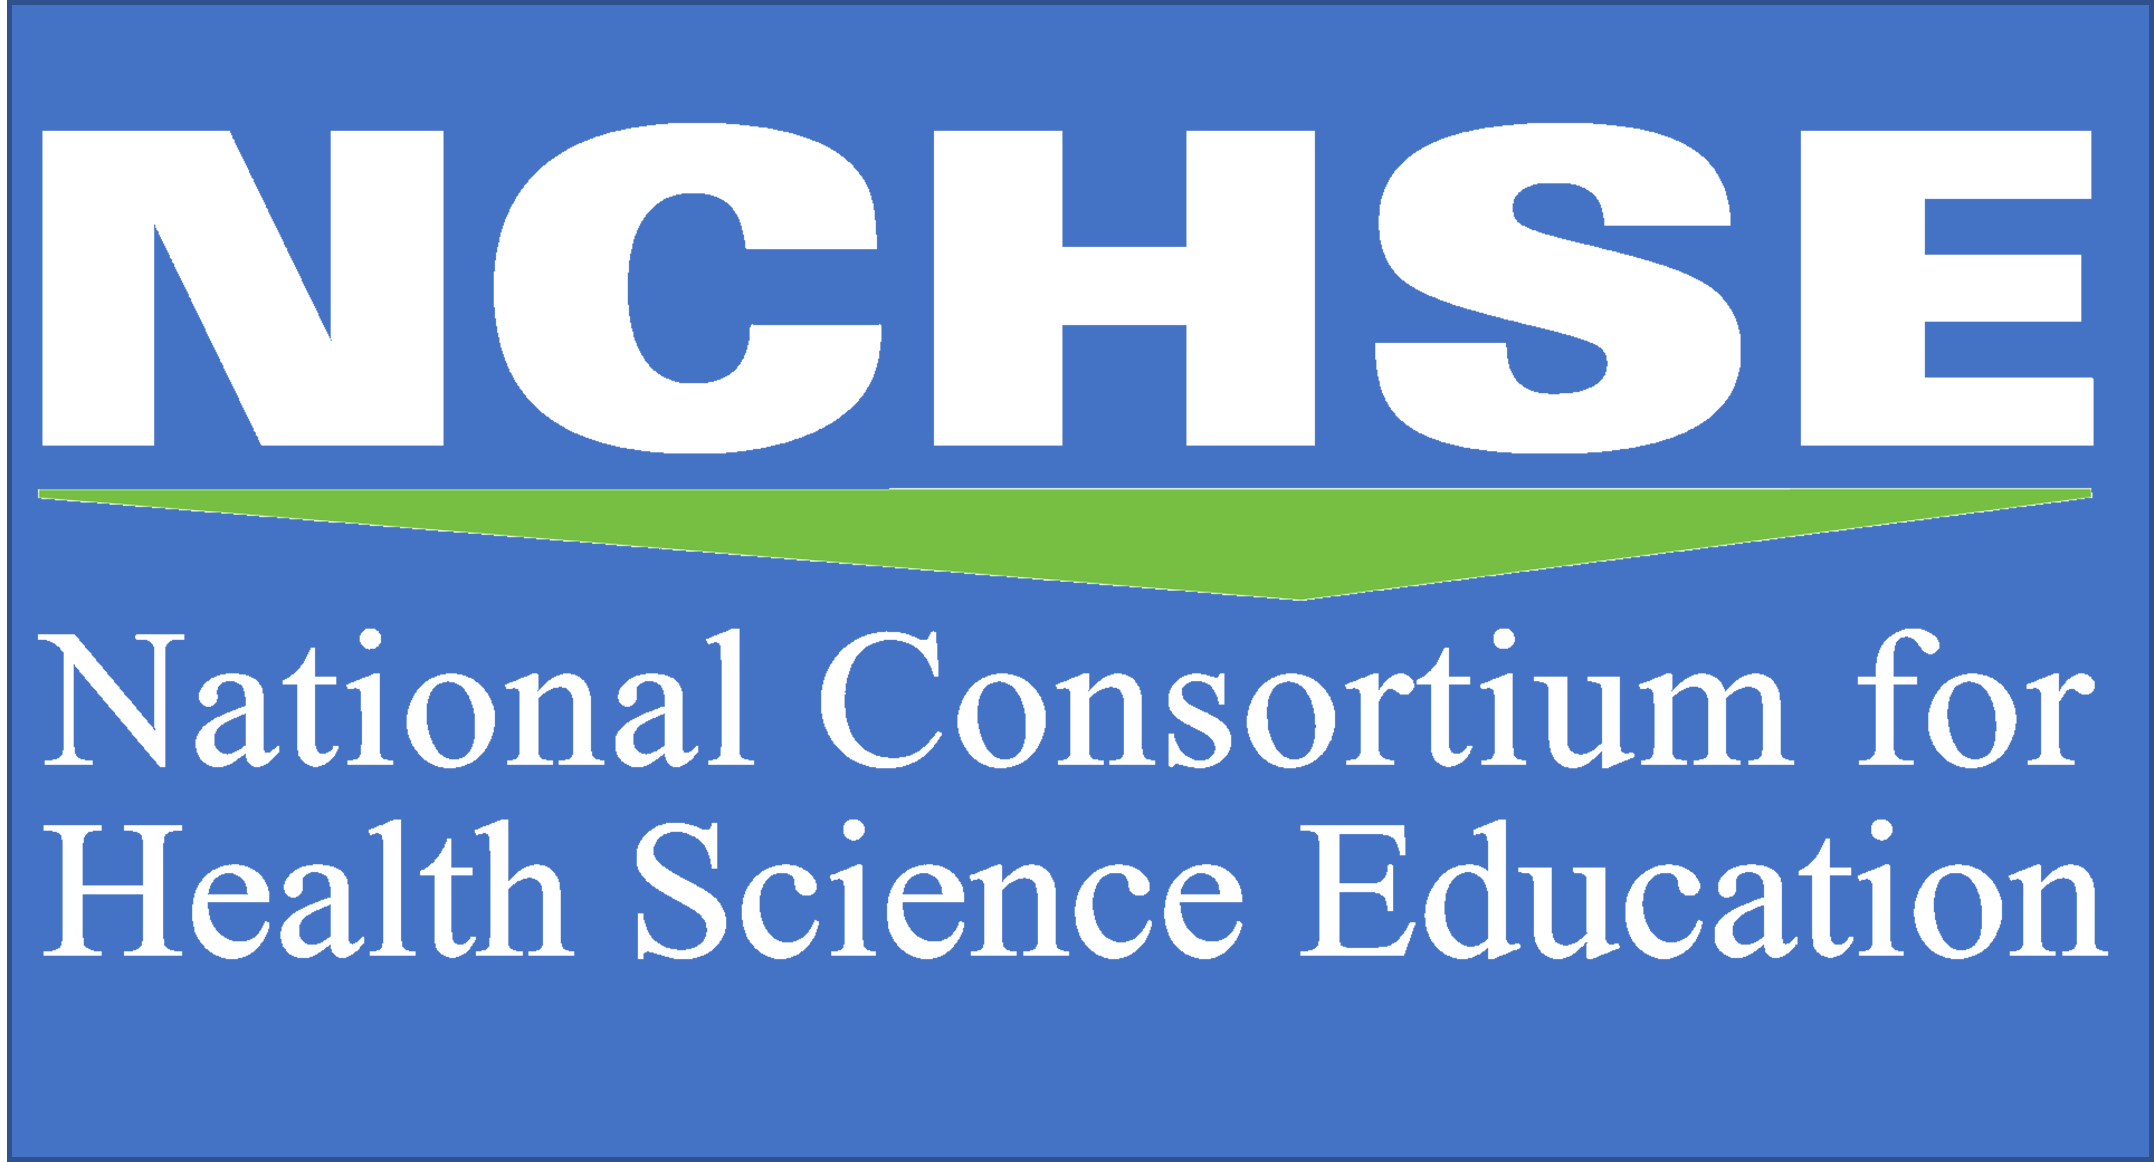 National Council for Health Science Education (NCHSE)